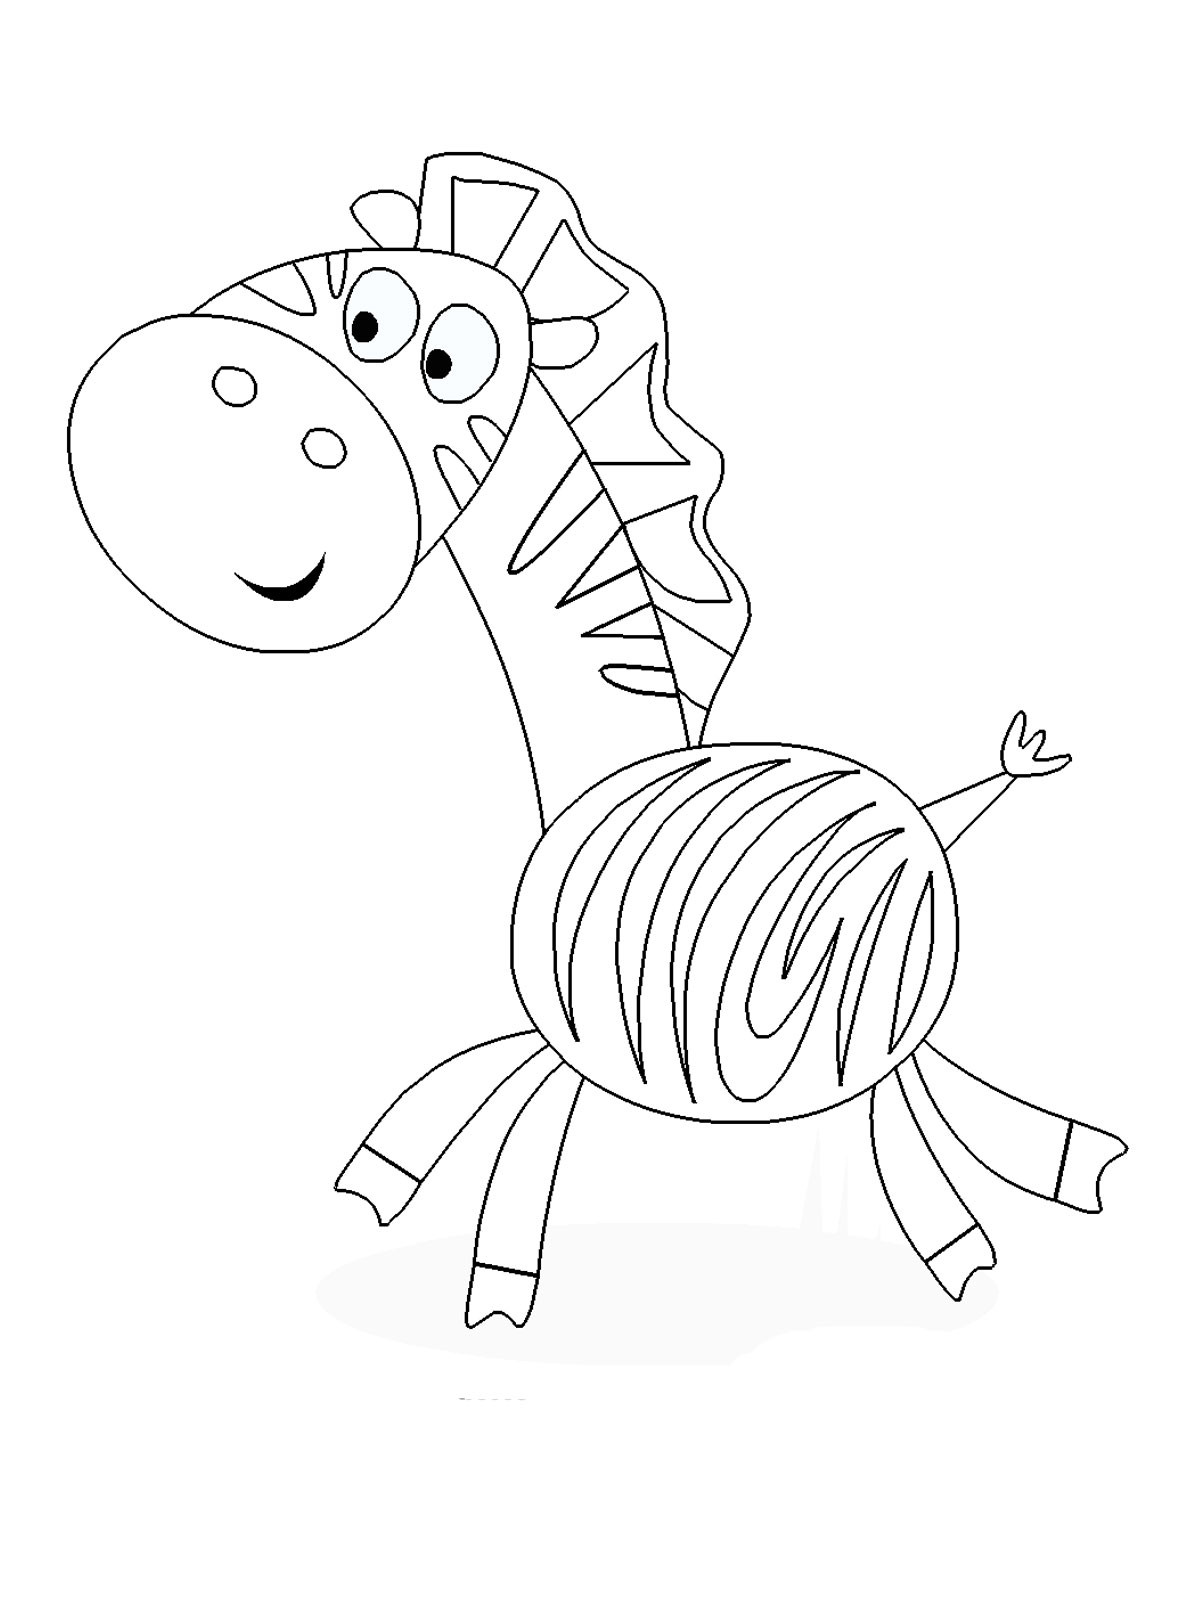 Free Coloring Pages For Toddlers
 Printable coloring pages for kids